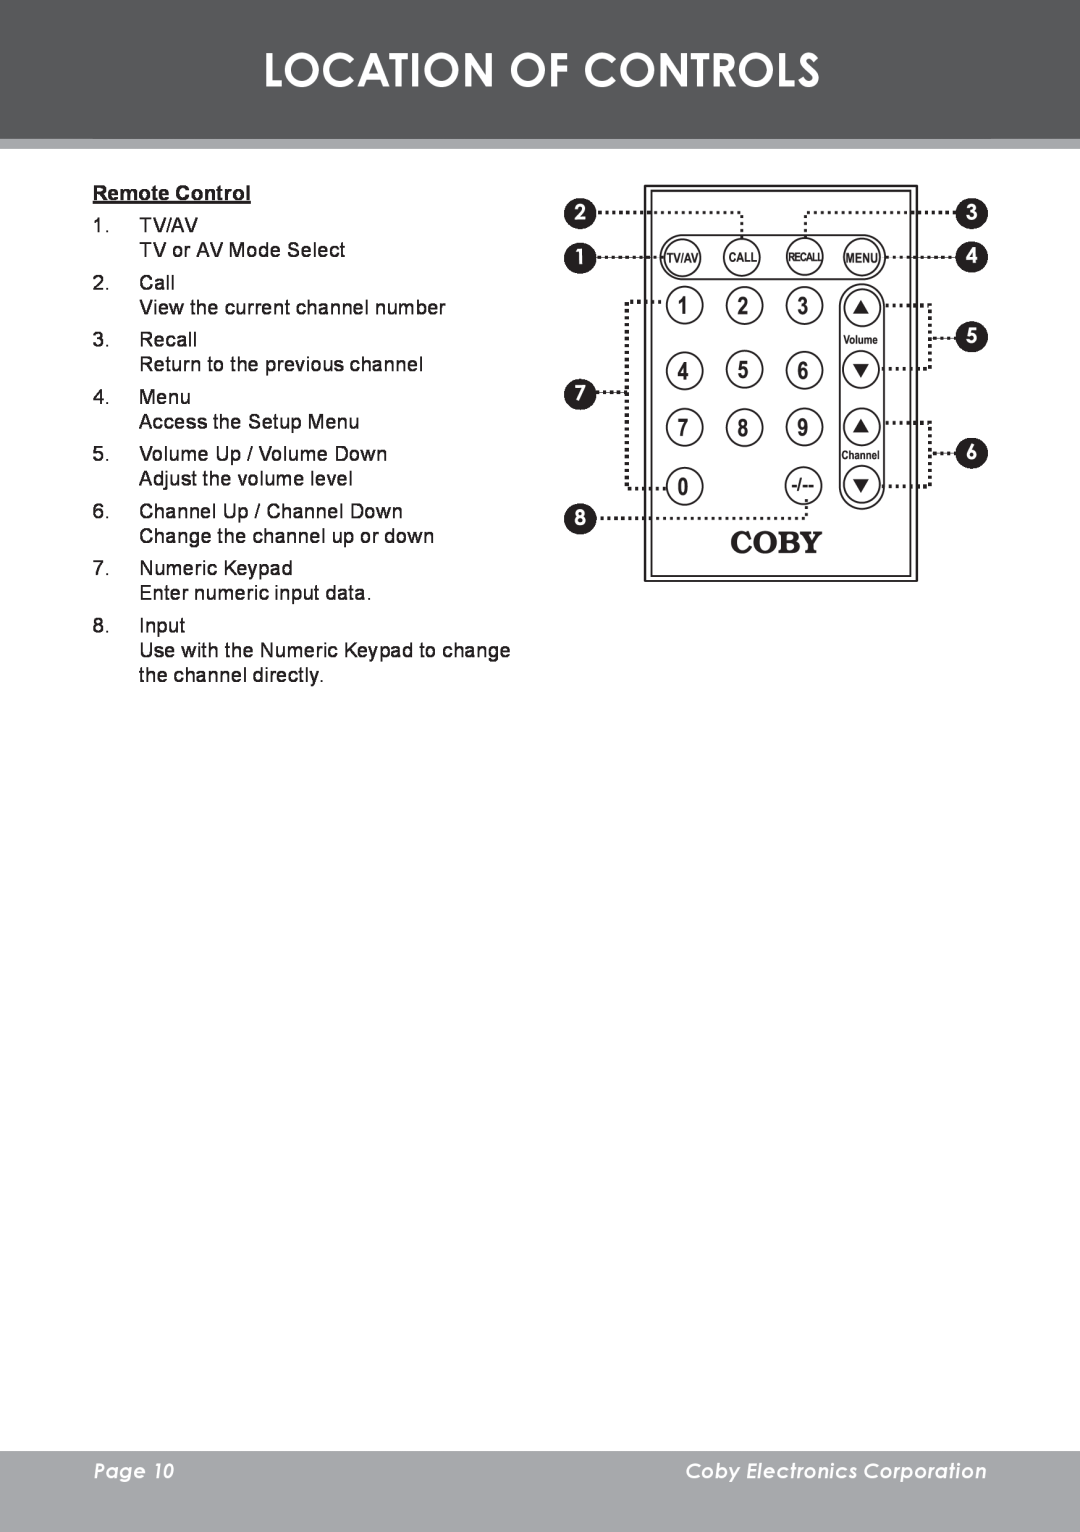 COBY electronic TF-TV705 instruction manual Remote Control, Page, Location Of Controls, Coby Electronics Corporation 